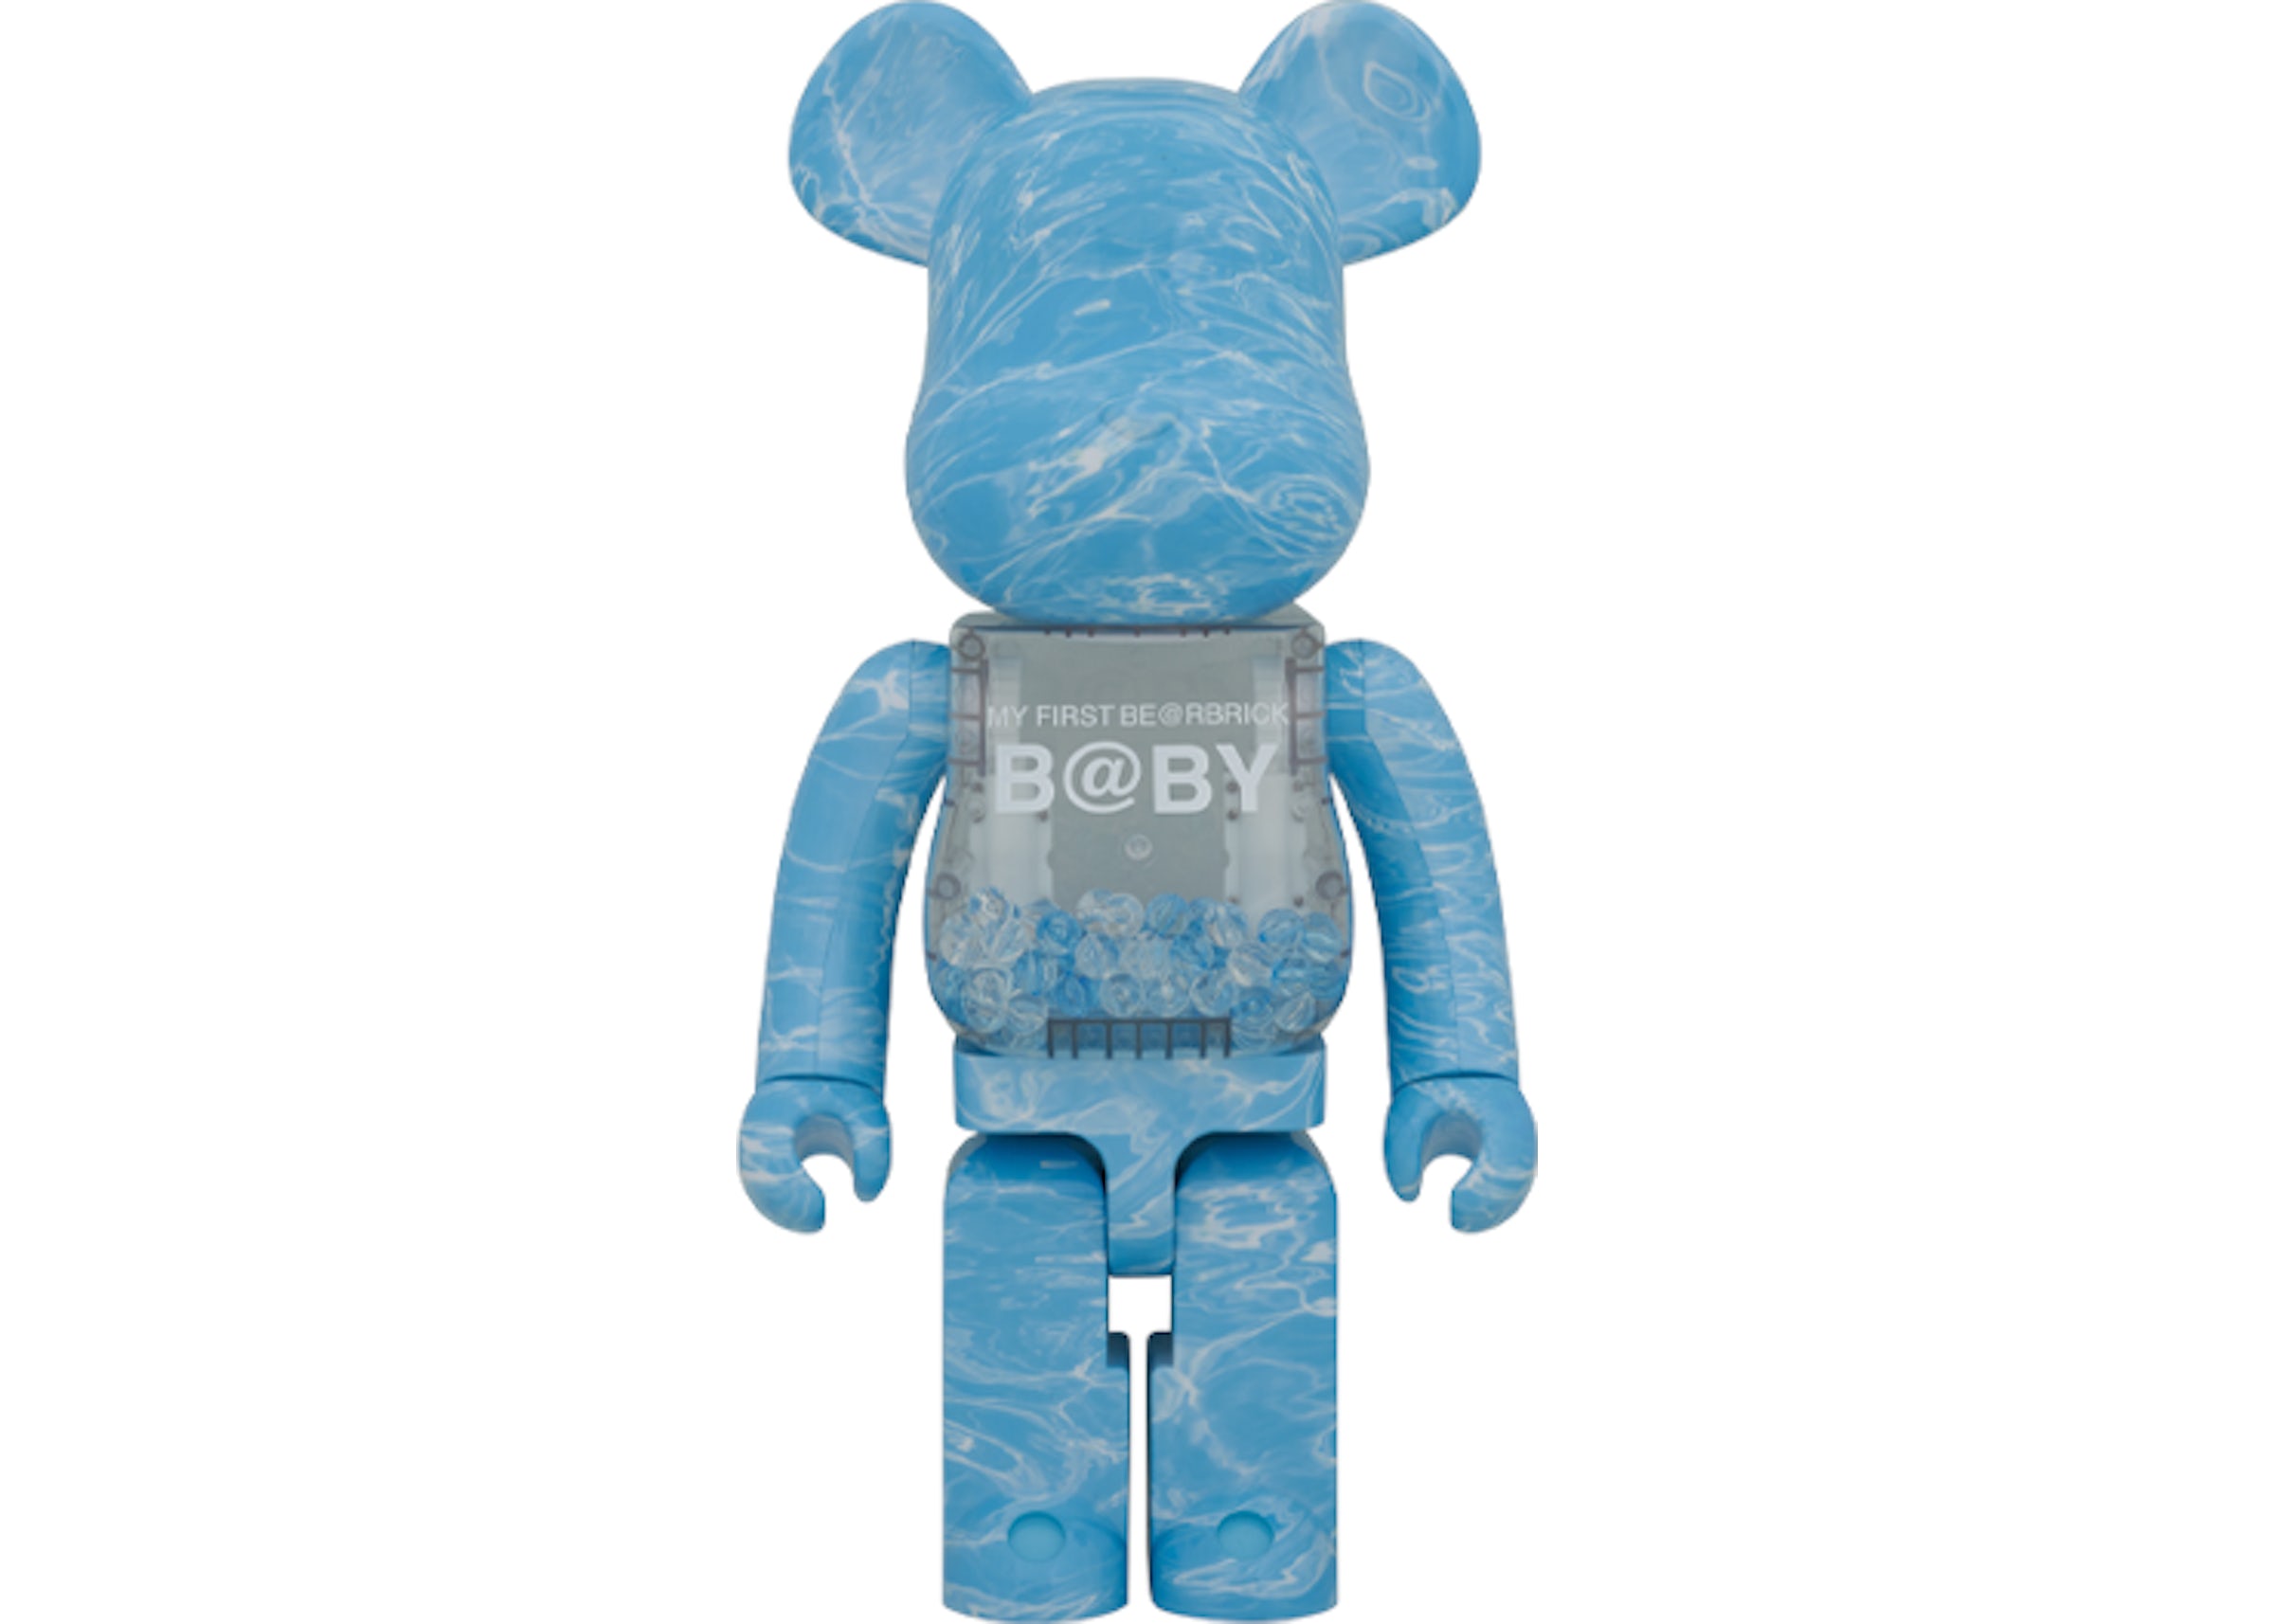 Bearbrick MY FIRST BE@RBRICK B@BY WATER CREST Ver. 1000%